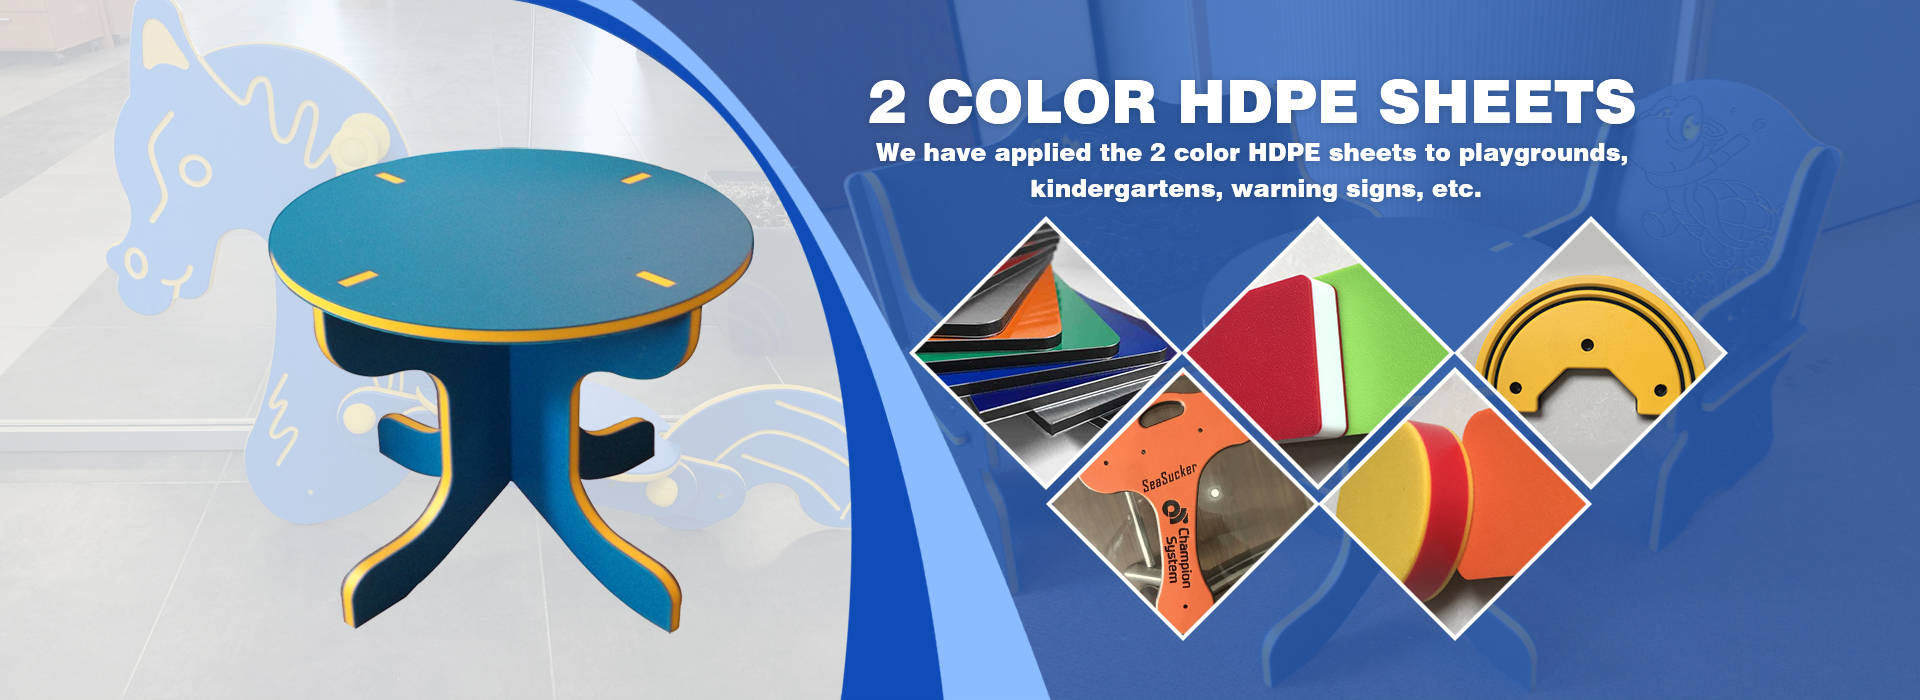 2 color hdpe